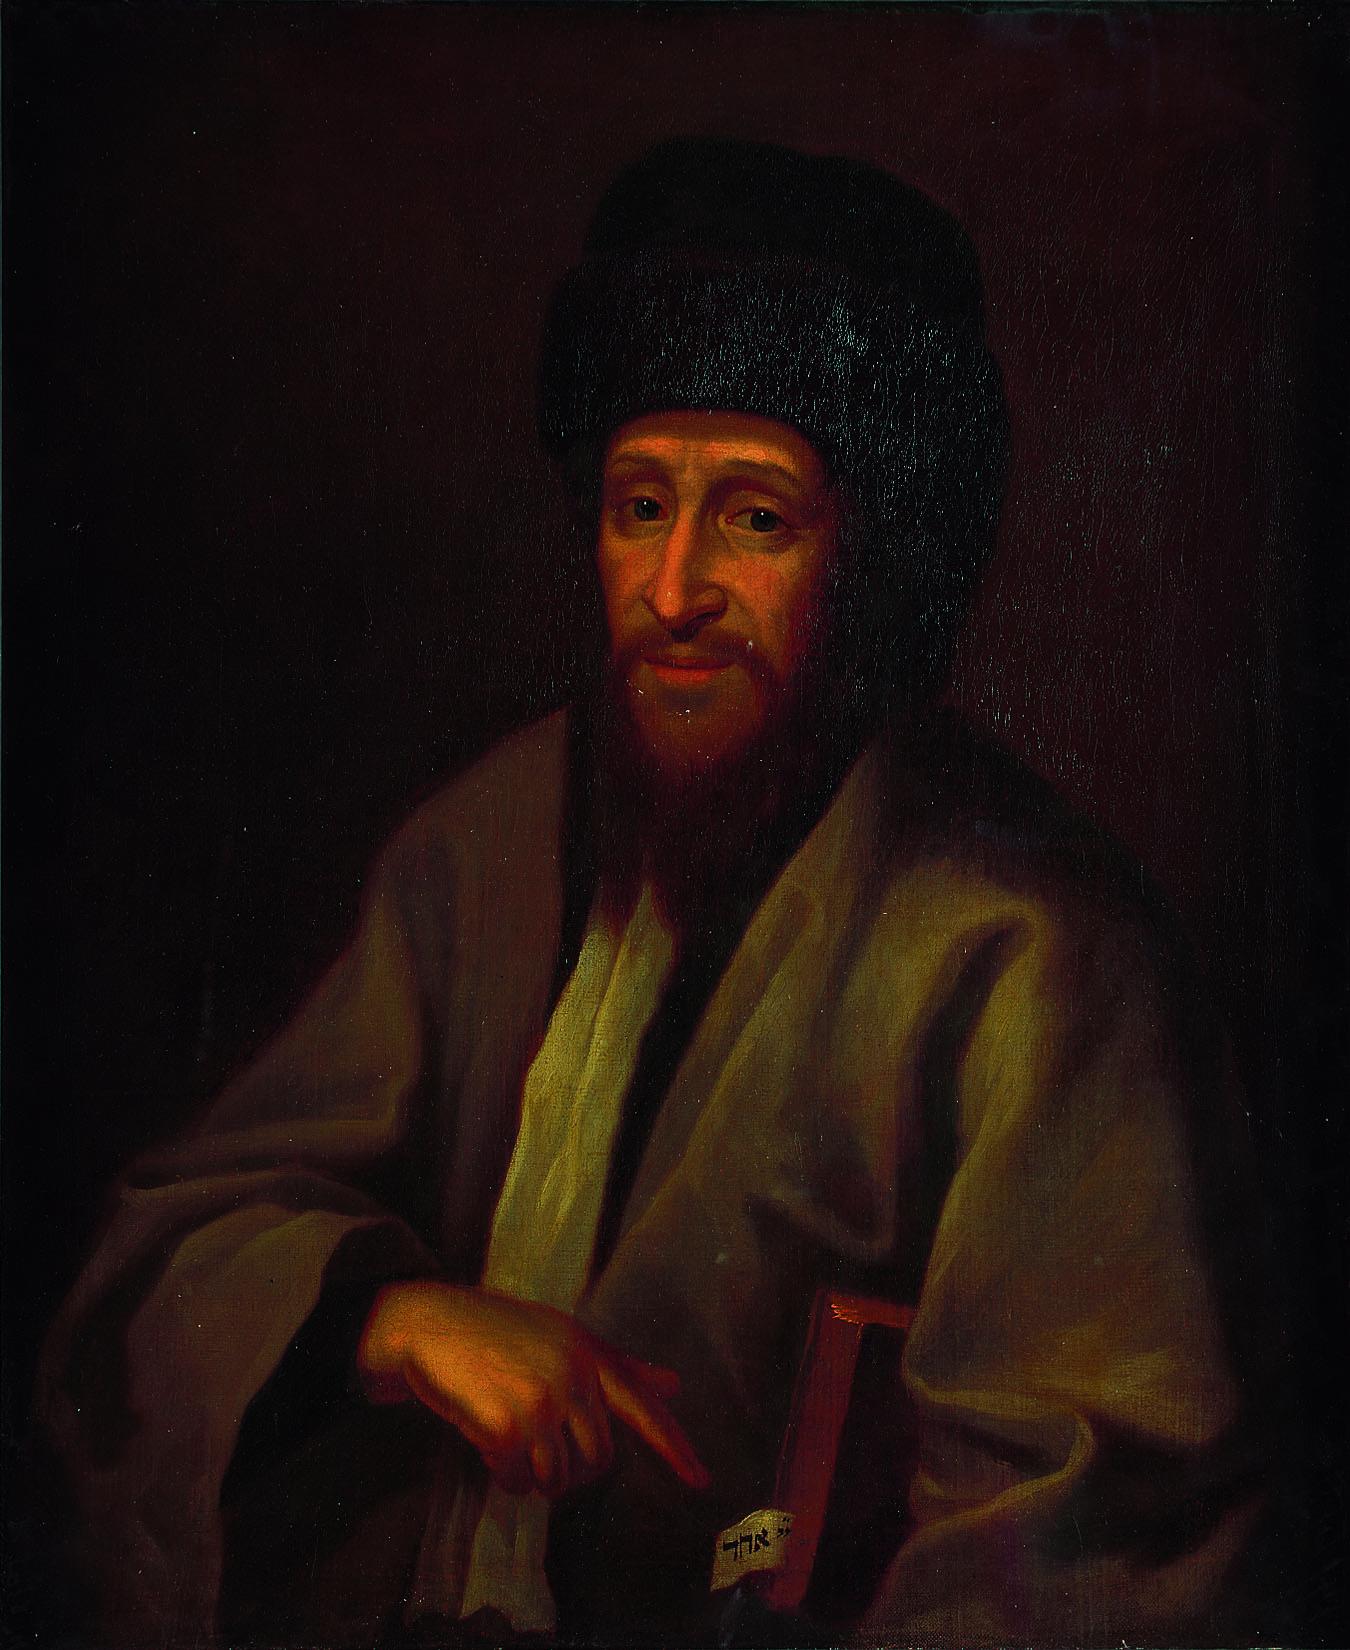 Portrait painting of man in hat facing viewer and pointing toward a book tucked under his arm with slip of paper with Hebrew text.